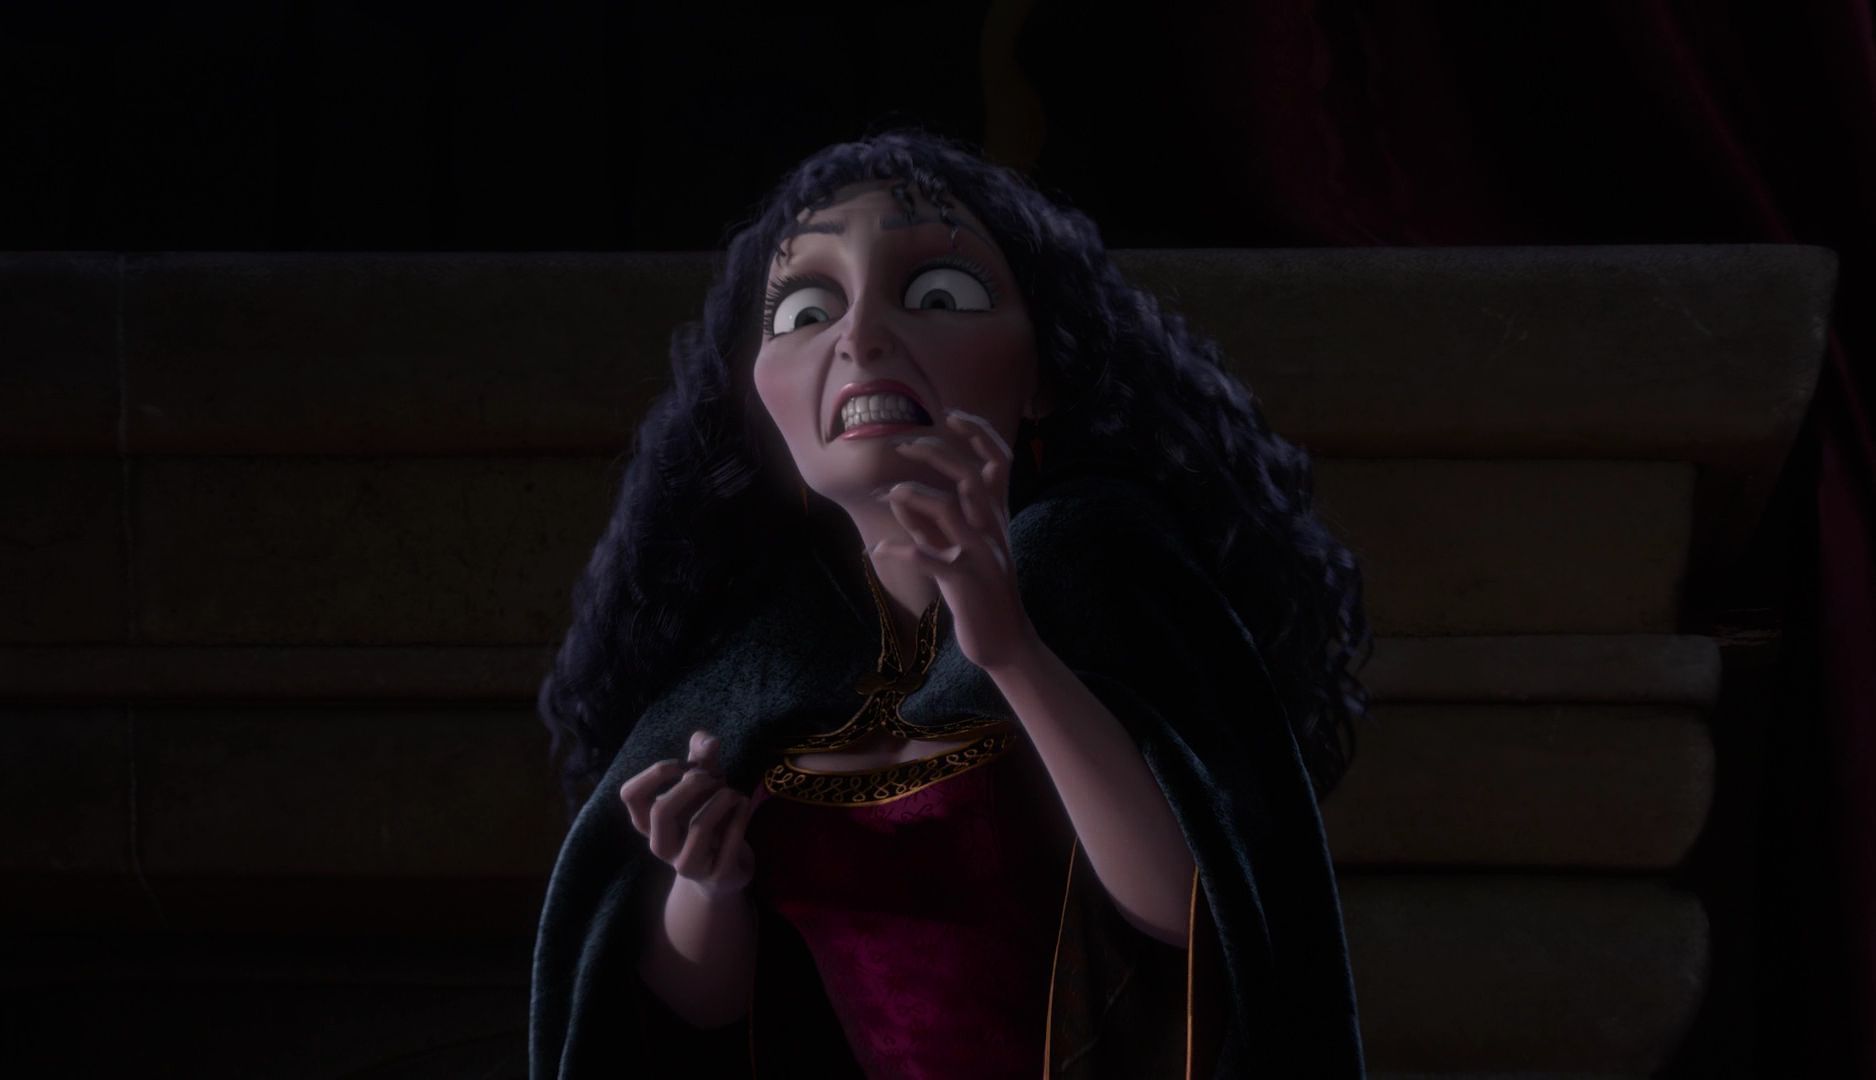 tangled Images on Fanpop 